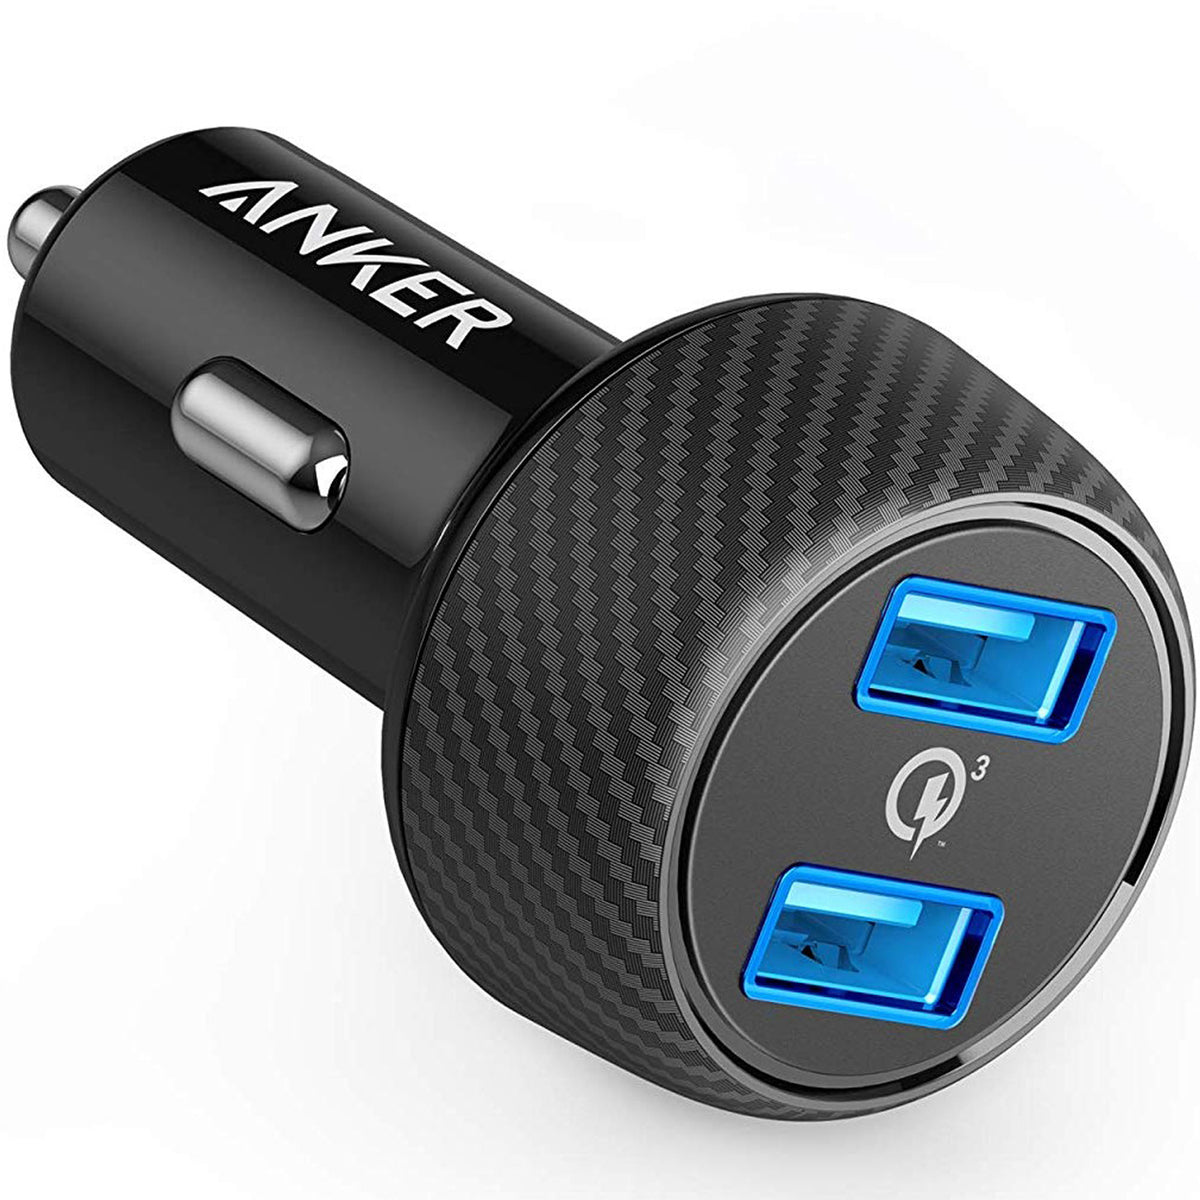 Anker Quick Charge 3.0 39W Dual USB Car Charger A2228H11